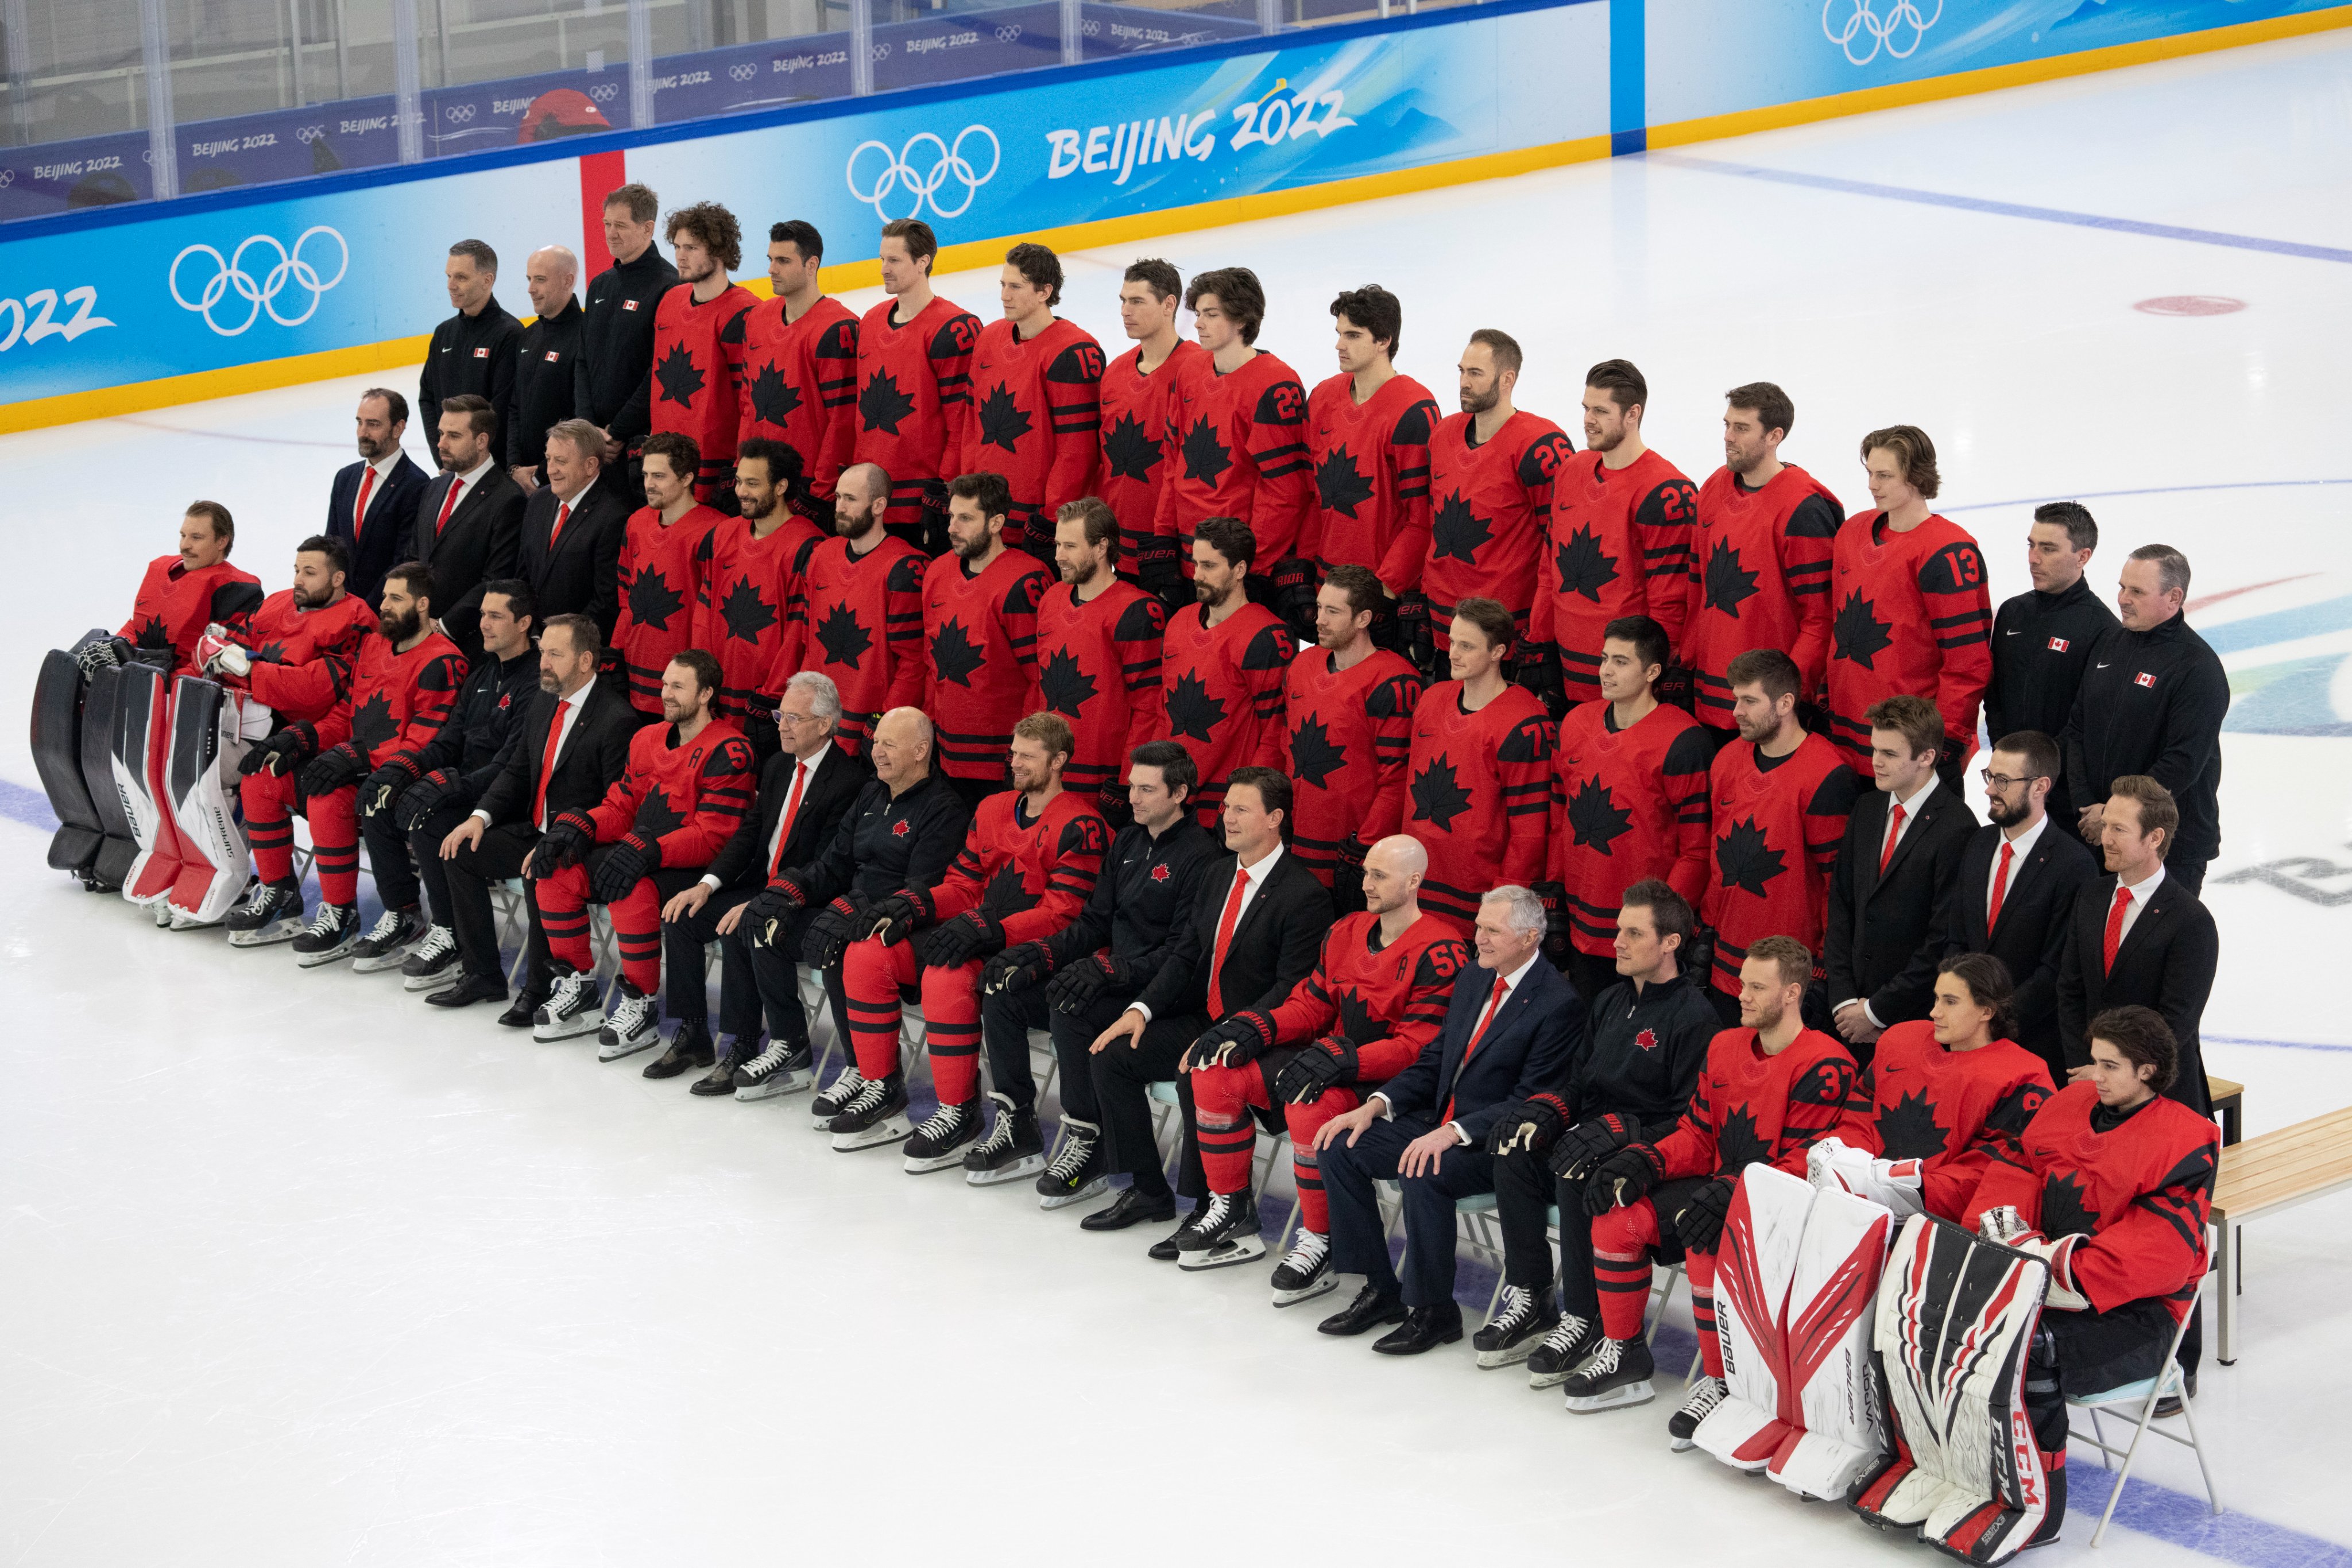 2022 Olympic Men's Hockey Team Canada Preview